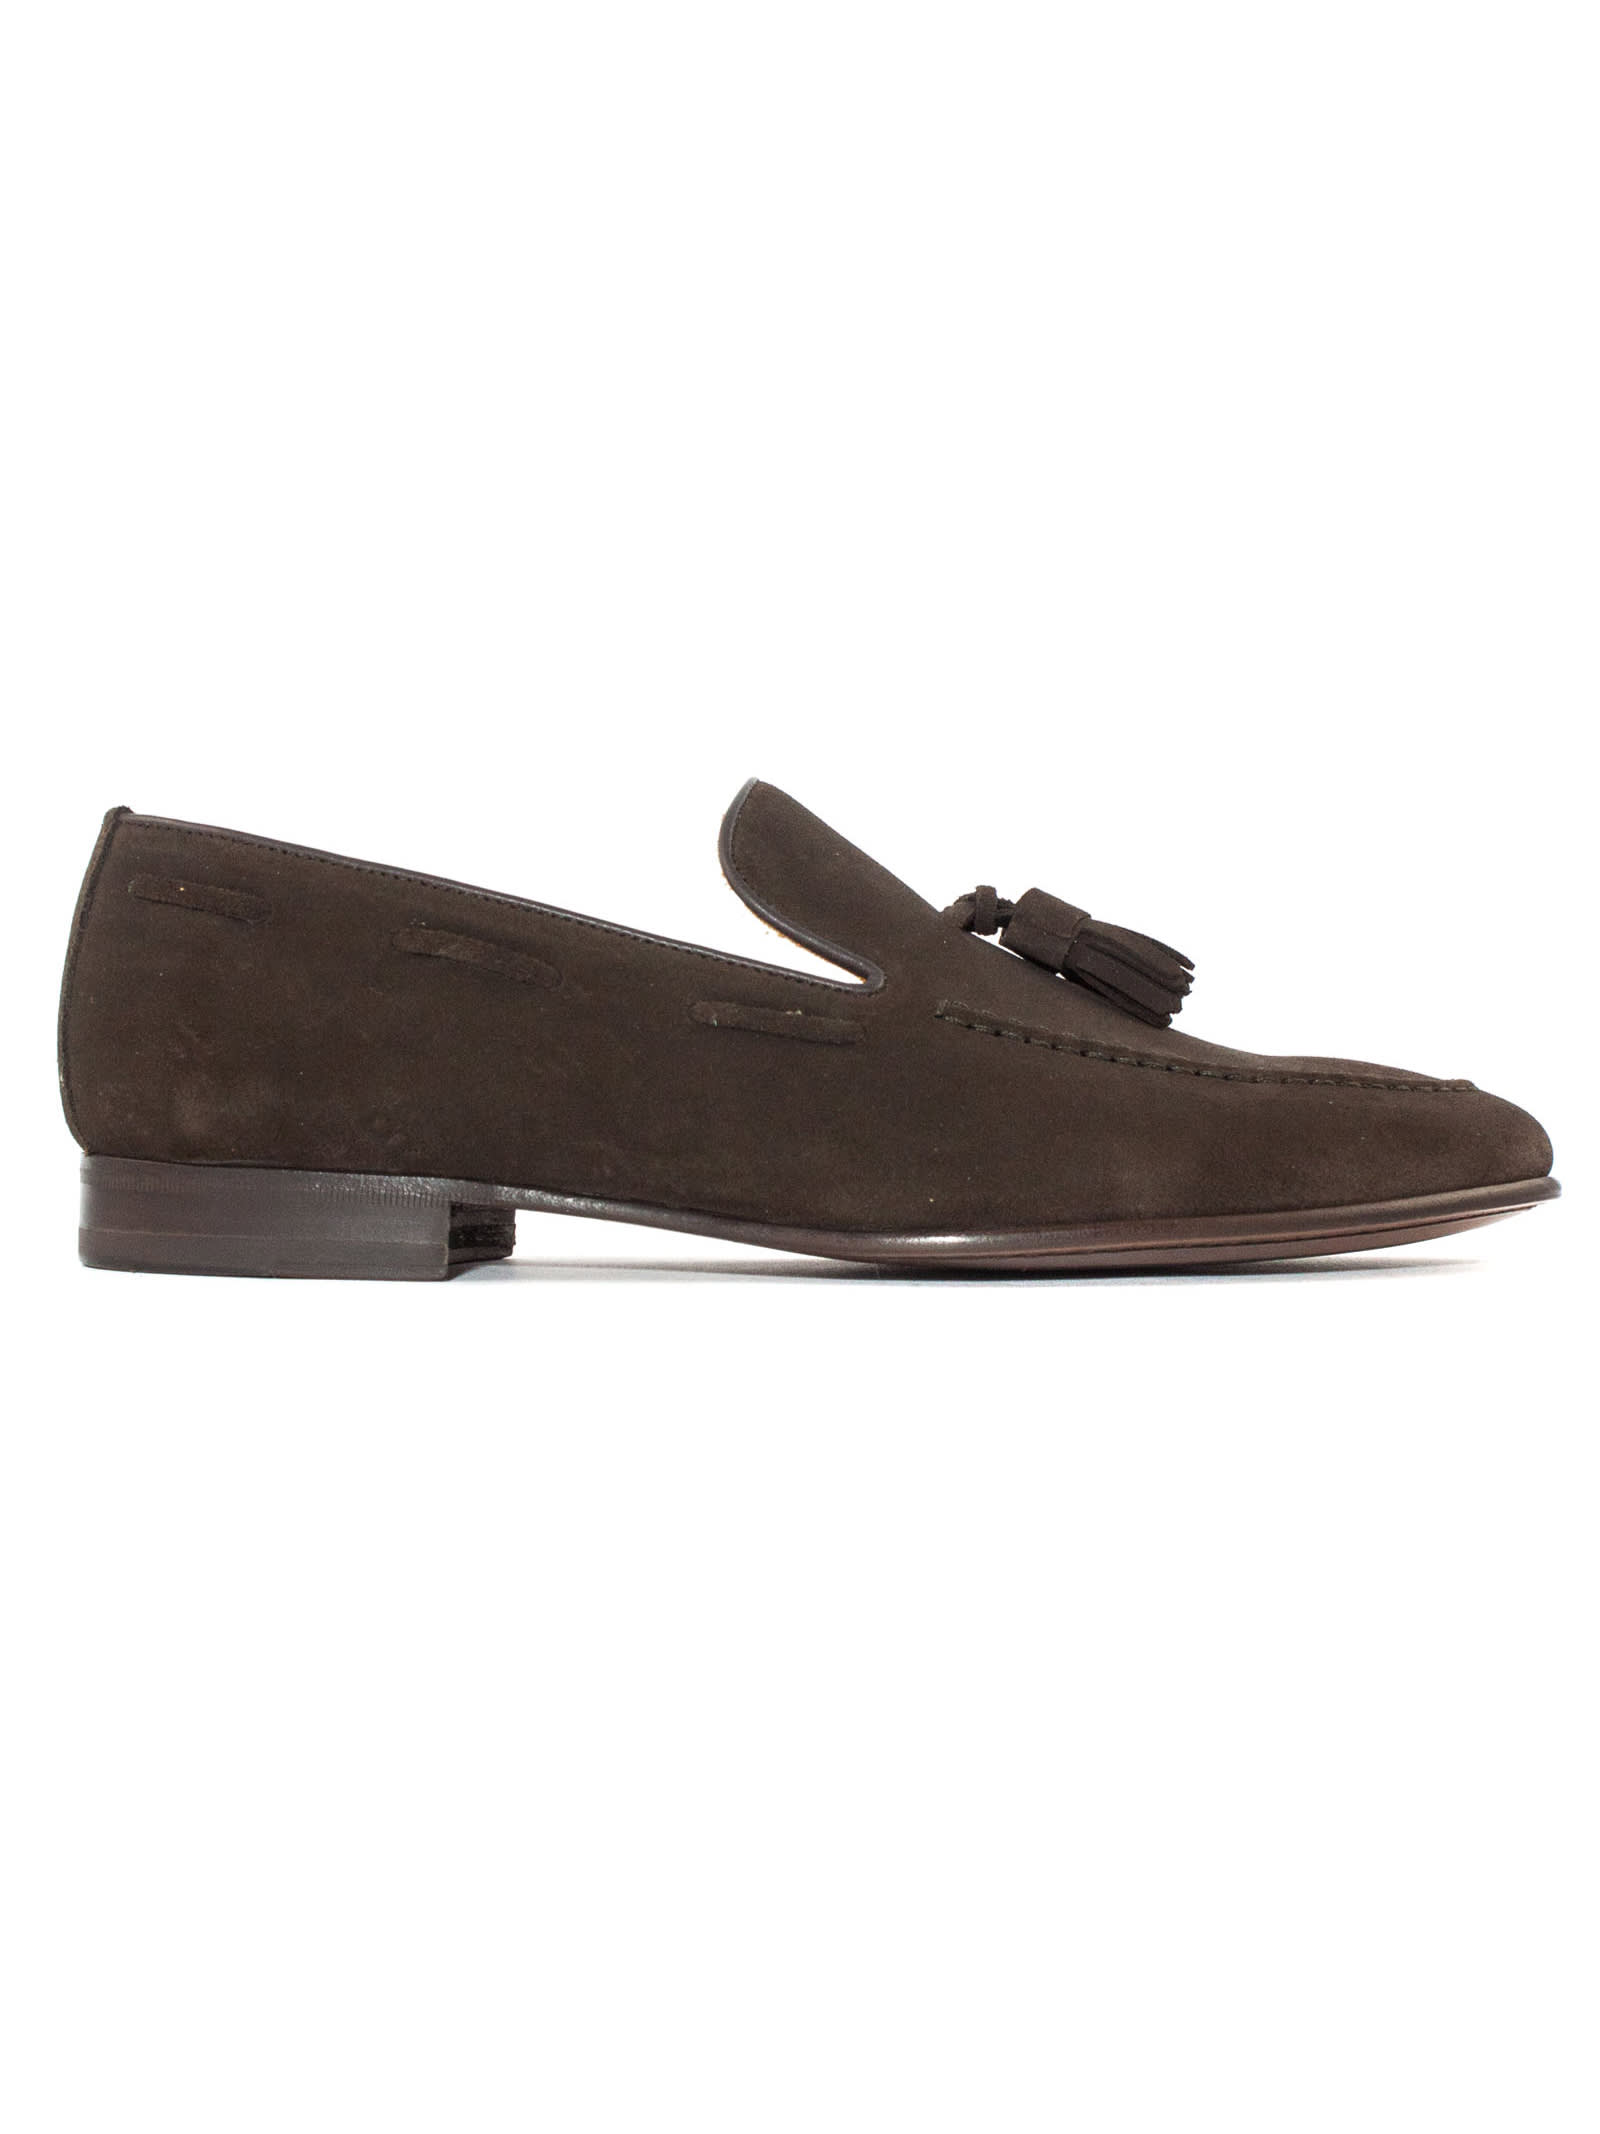 Berwick 1707 Brown Suede Loafers